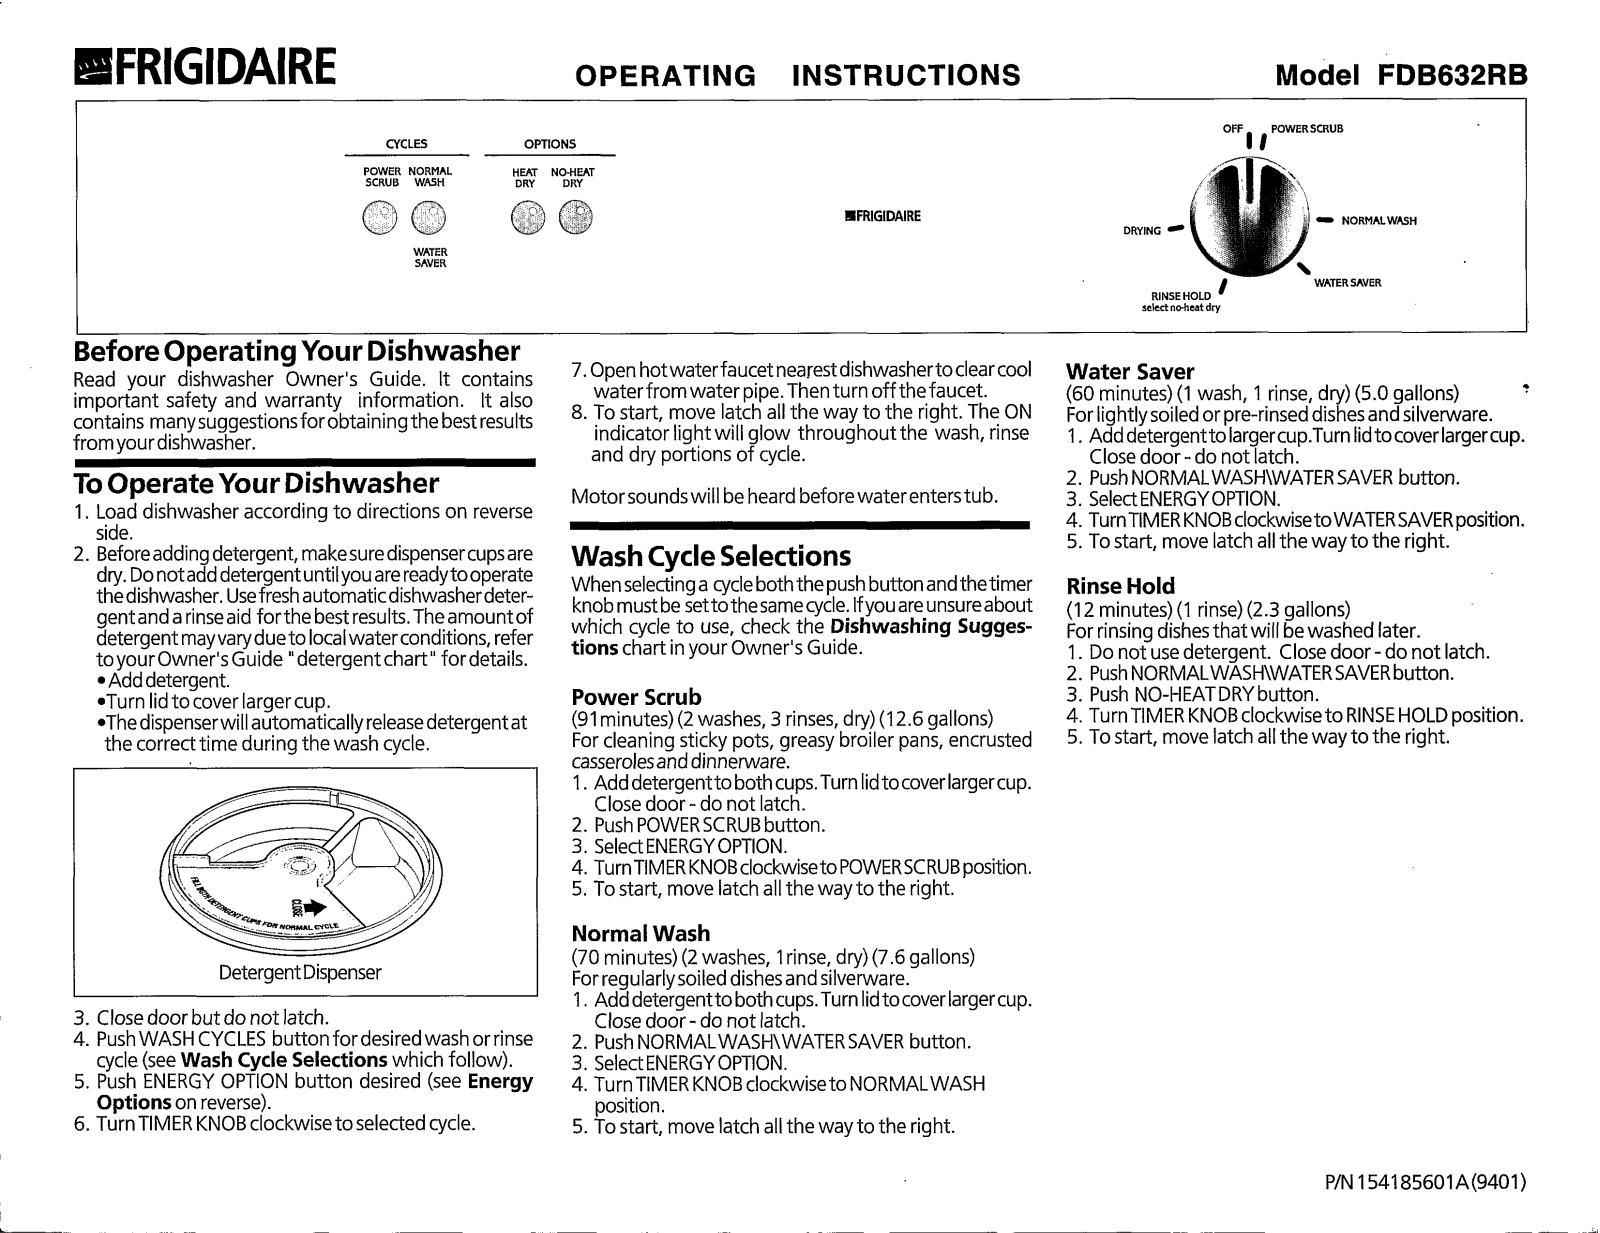 Frigidaire FDB632RB Owner's Guide